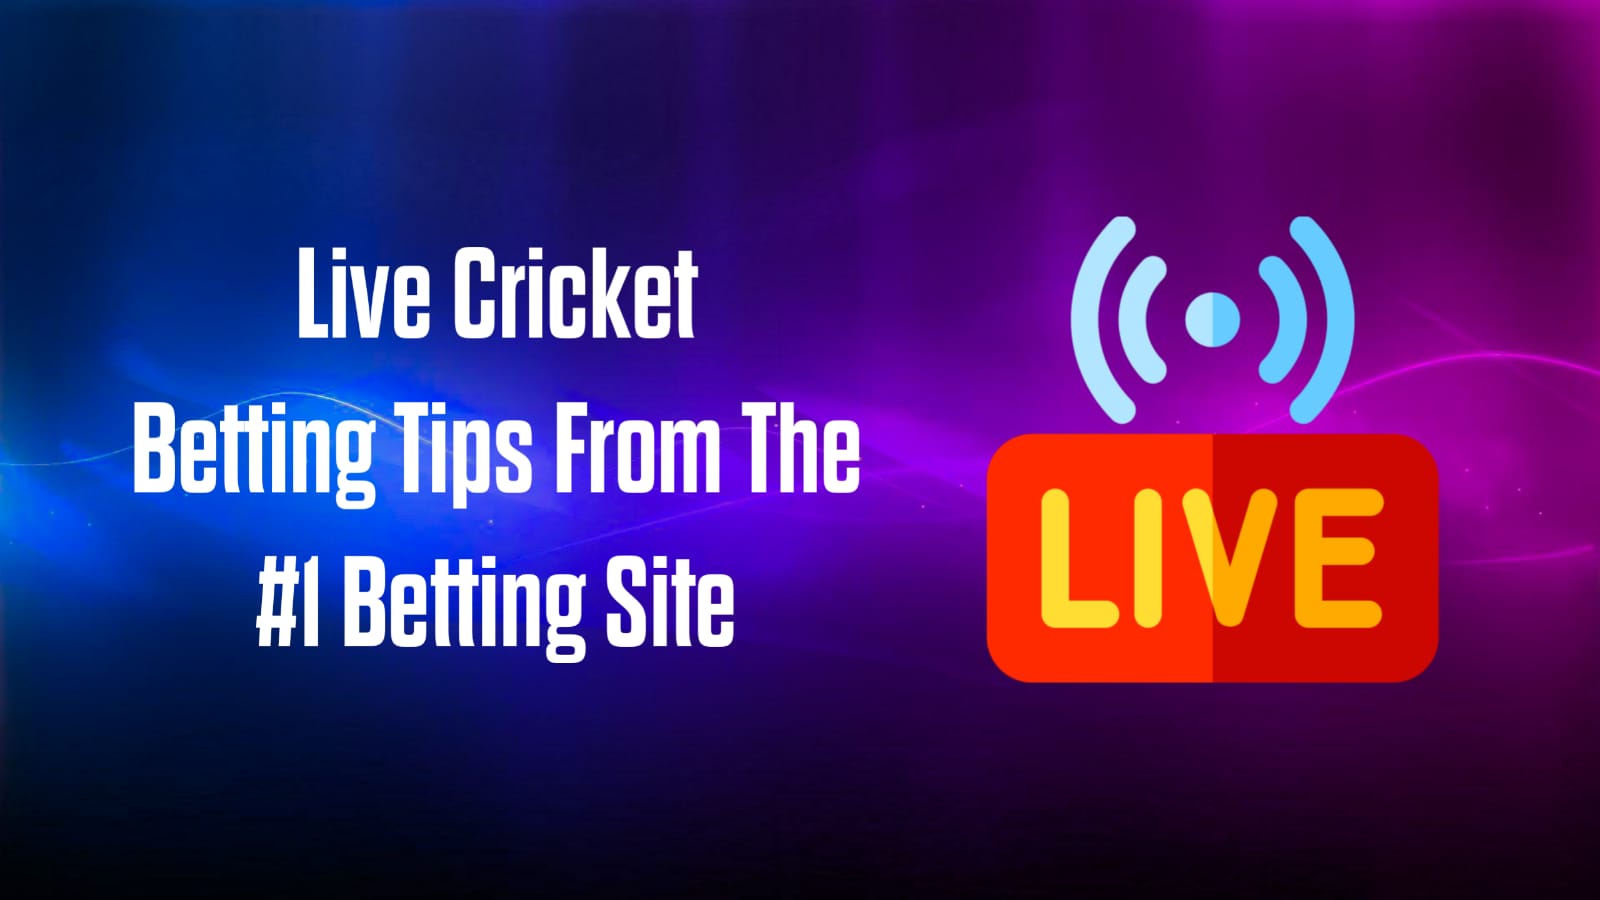 Live Cricket Betting Tips From The #1 Betting Site CBTF - See blogs related to cricket win and betting tips online